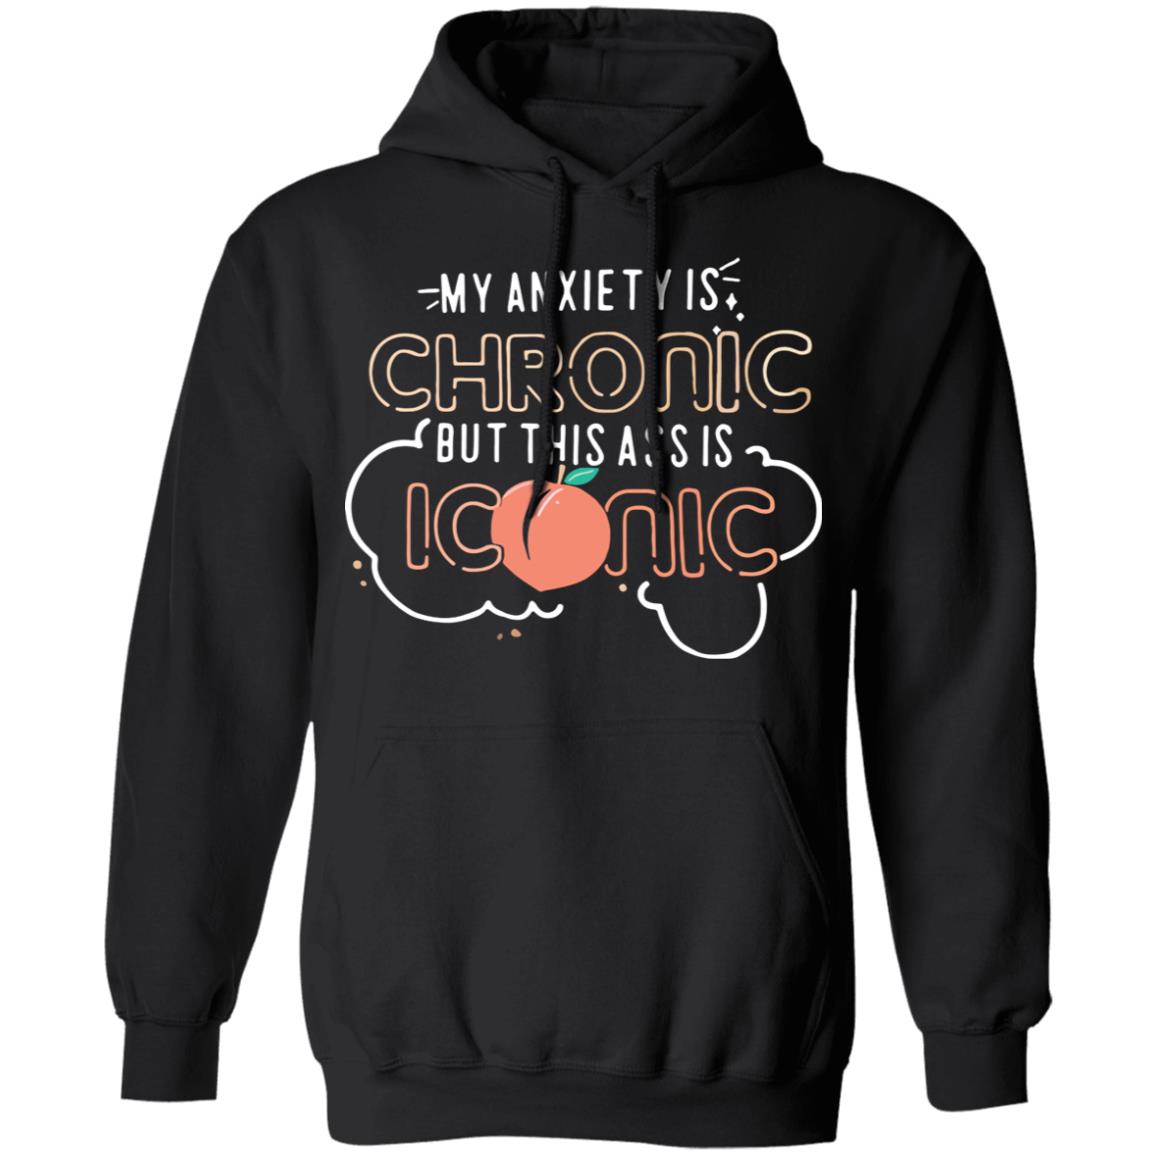 Retro My Anxiety Is Chronic But This Ass Is Iconic Funny Peach Sarcasm Sarcastic Sassy Peach Gift Shirt Tank Top 1Zmb